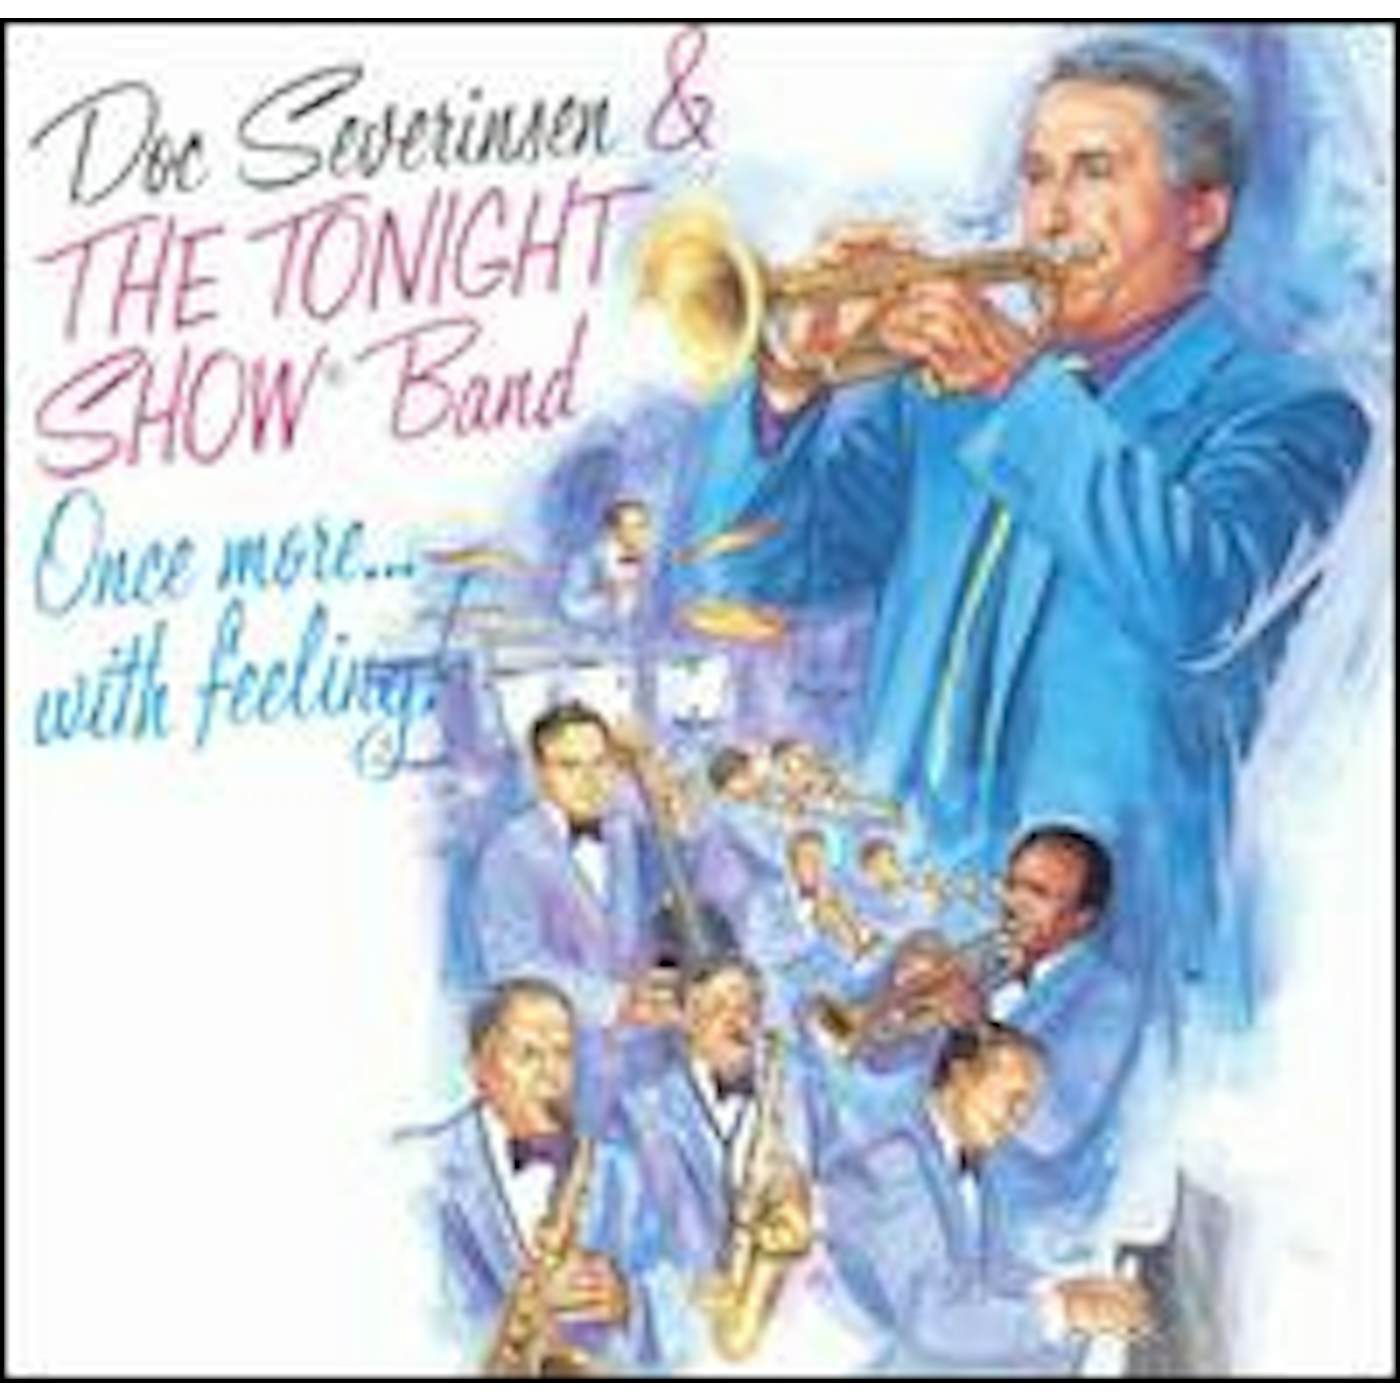 Doc Severinsen ONCE MORE WITH FEELING CD